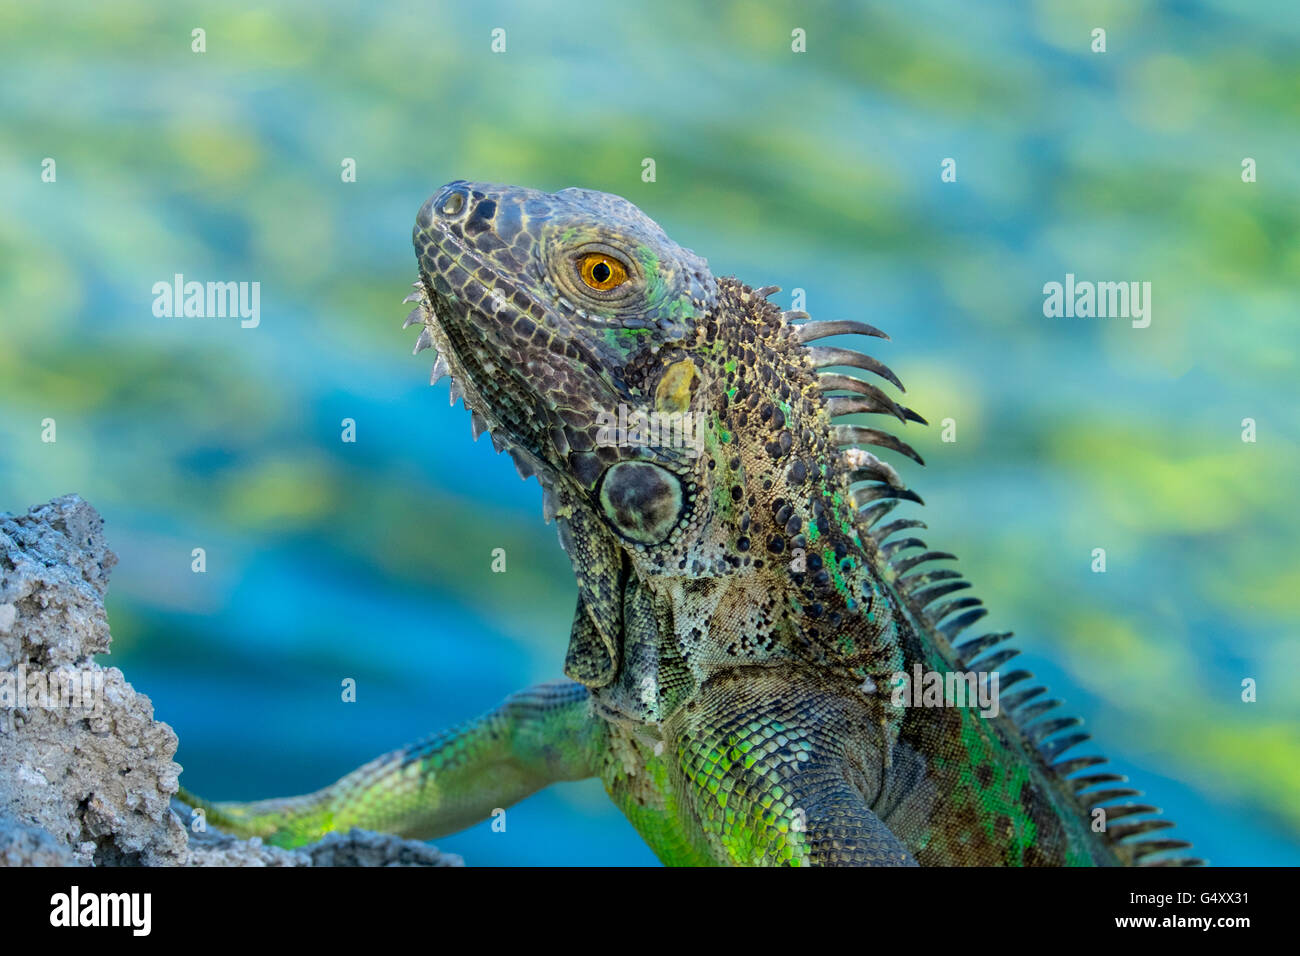 Green iguana against a blue, yellow and green blurred background in Grand Cayman Stock Photo